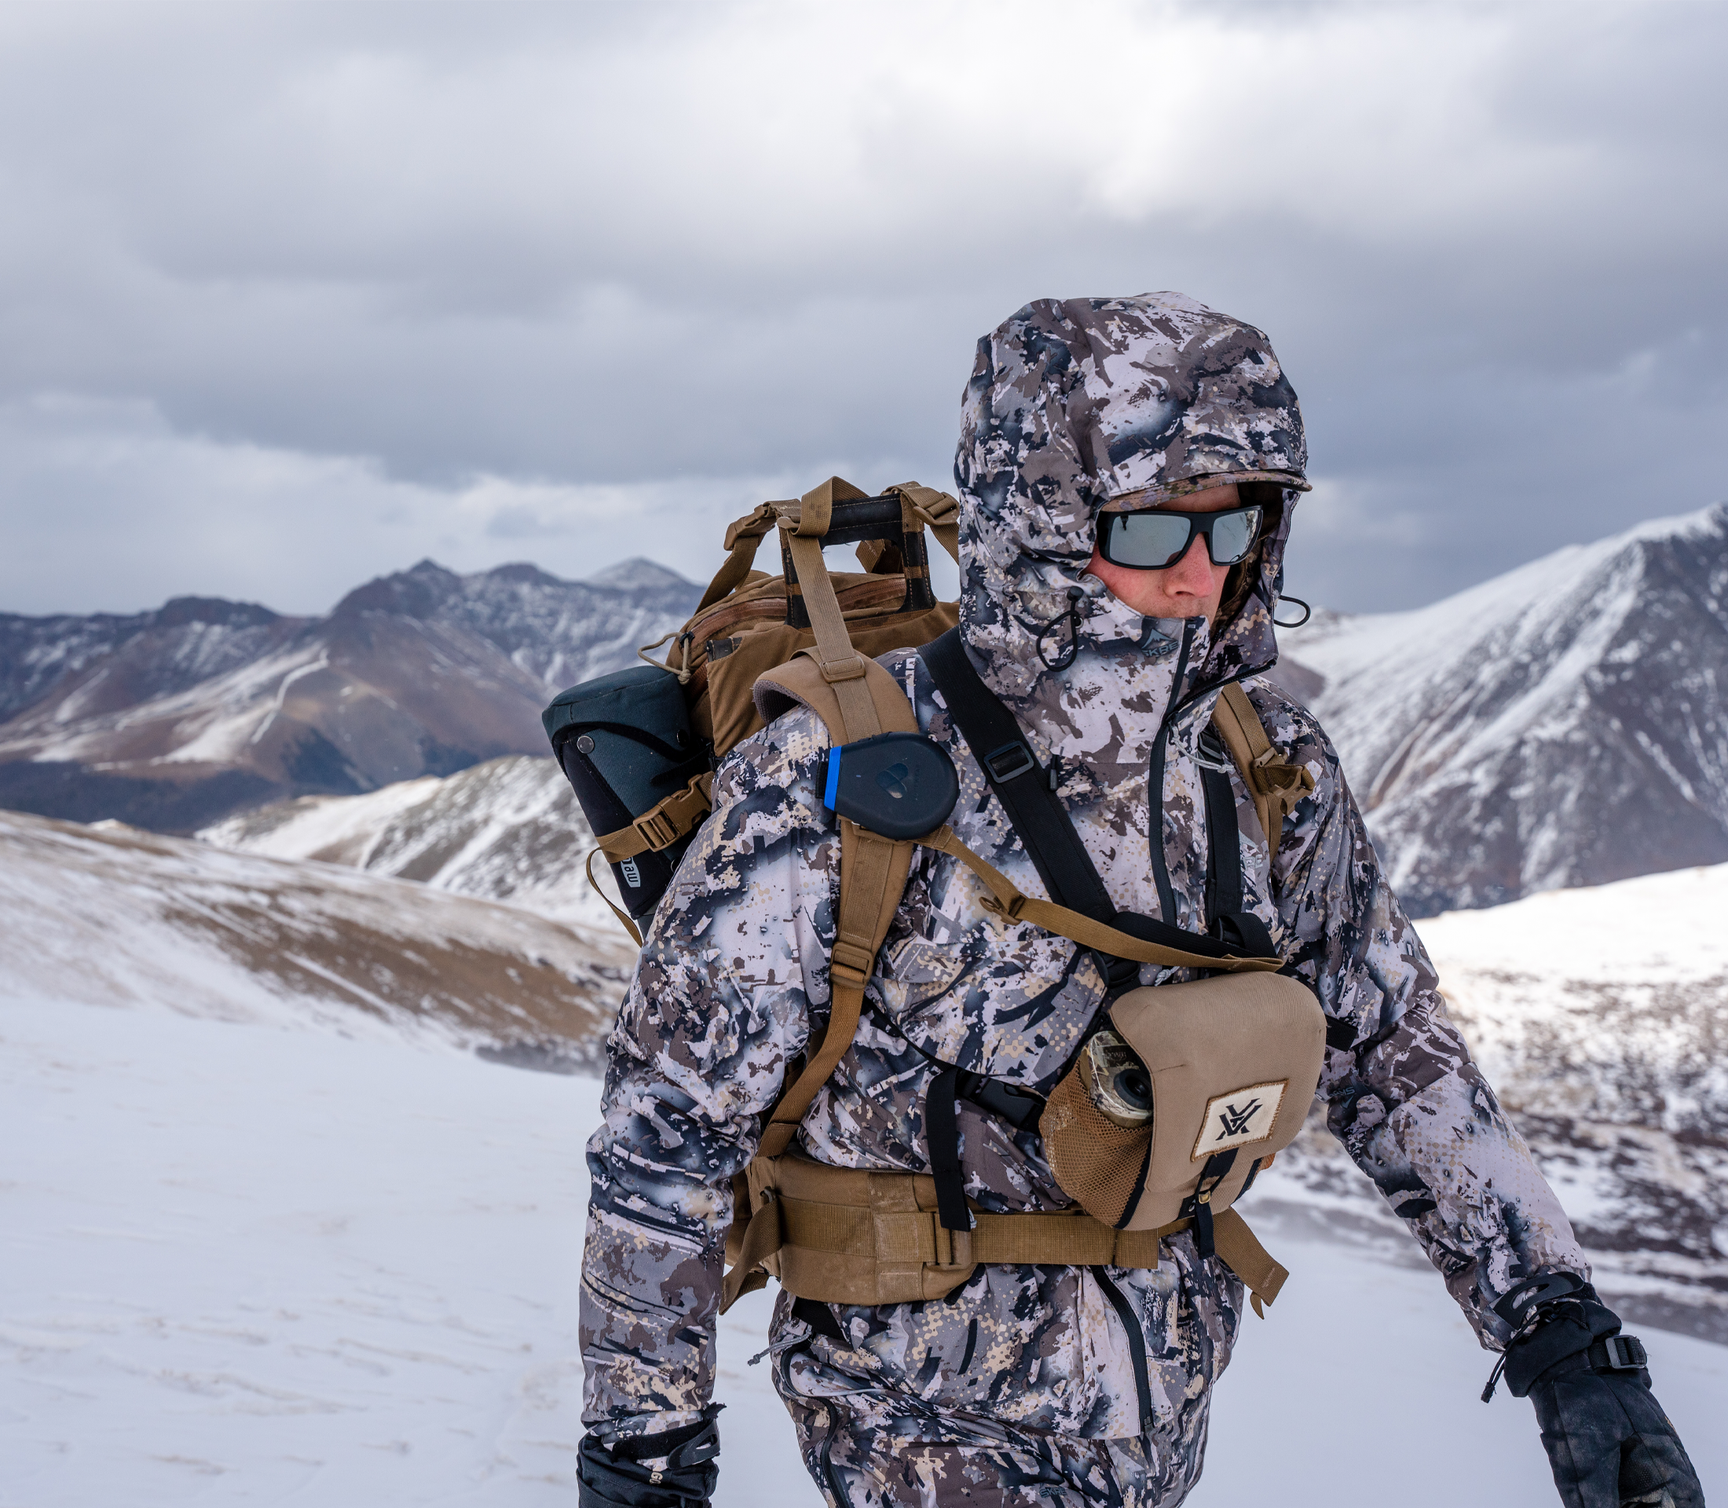 Man in extreme cold hunting gear